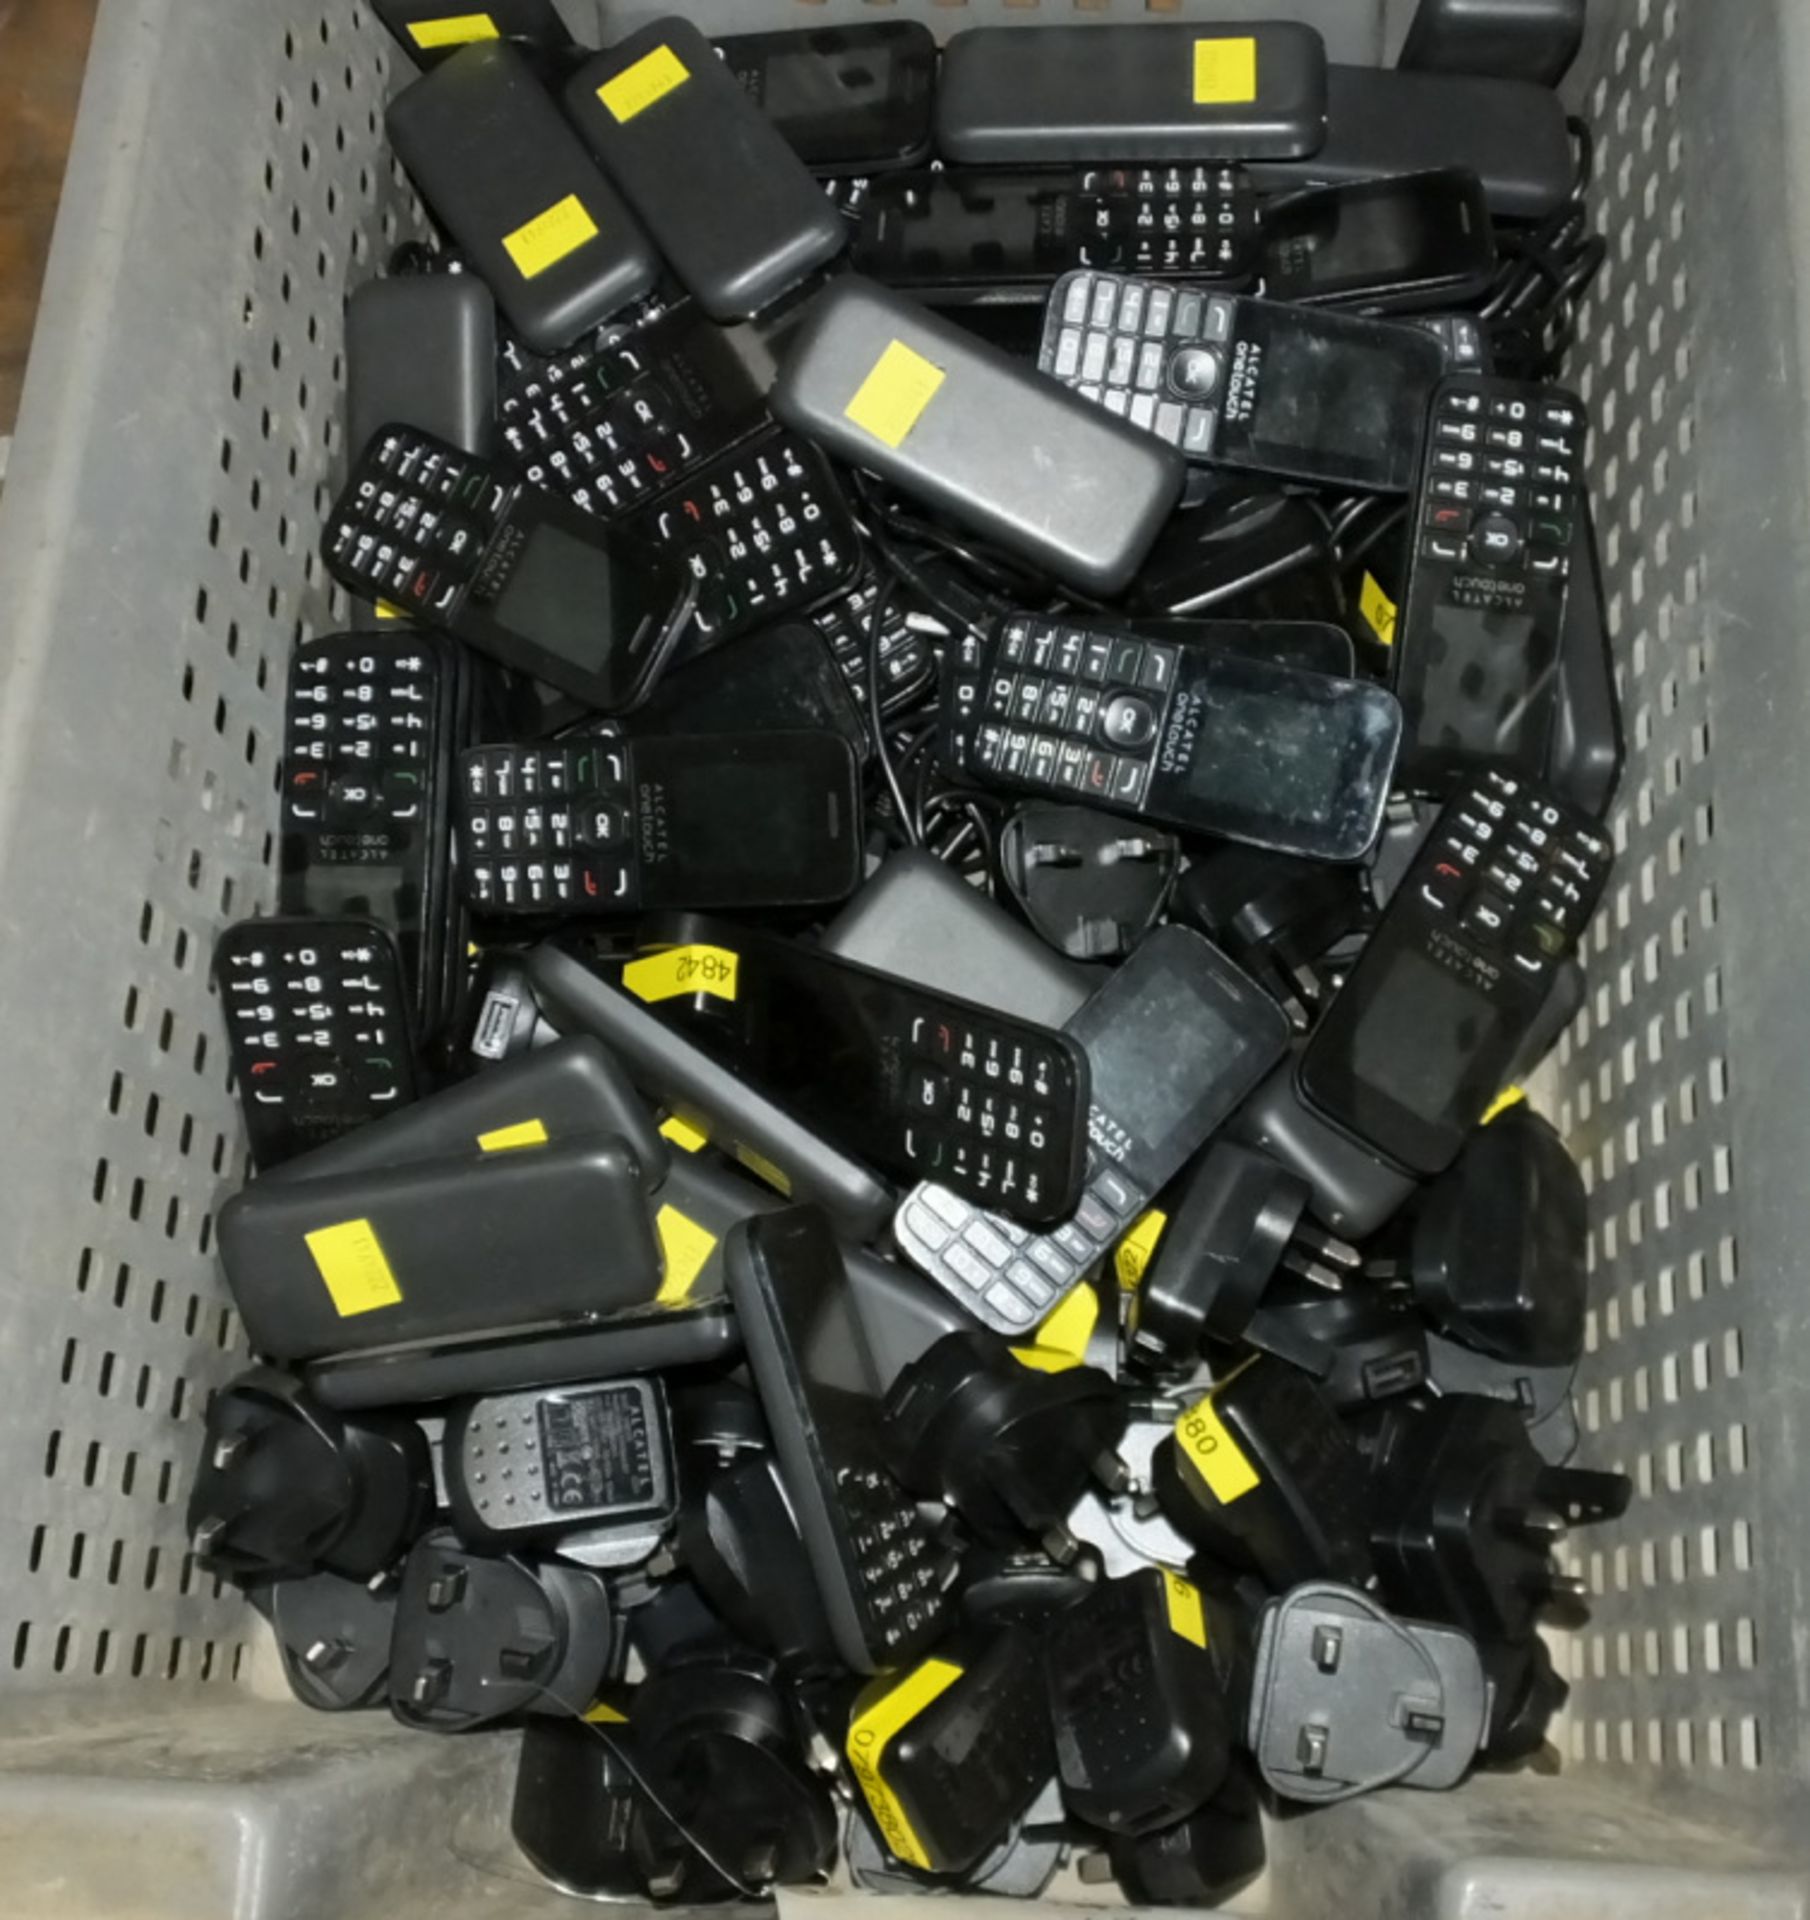 50x Alcatel One Touch 2035X Mobile Phones - Image 2 of 3